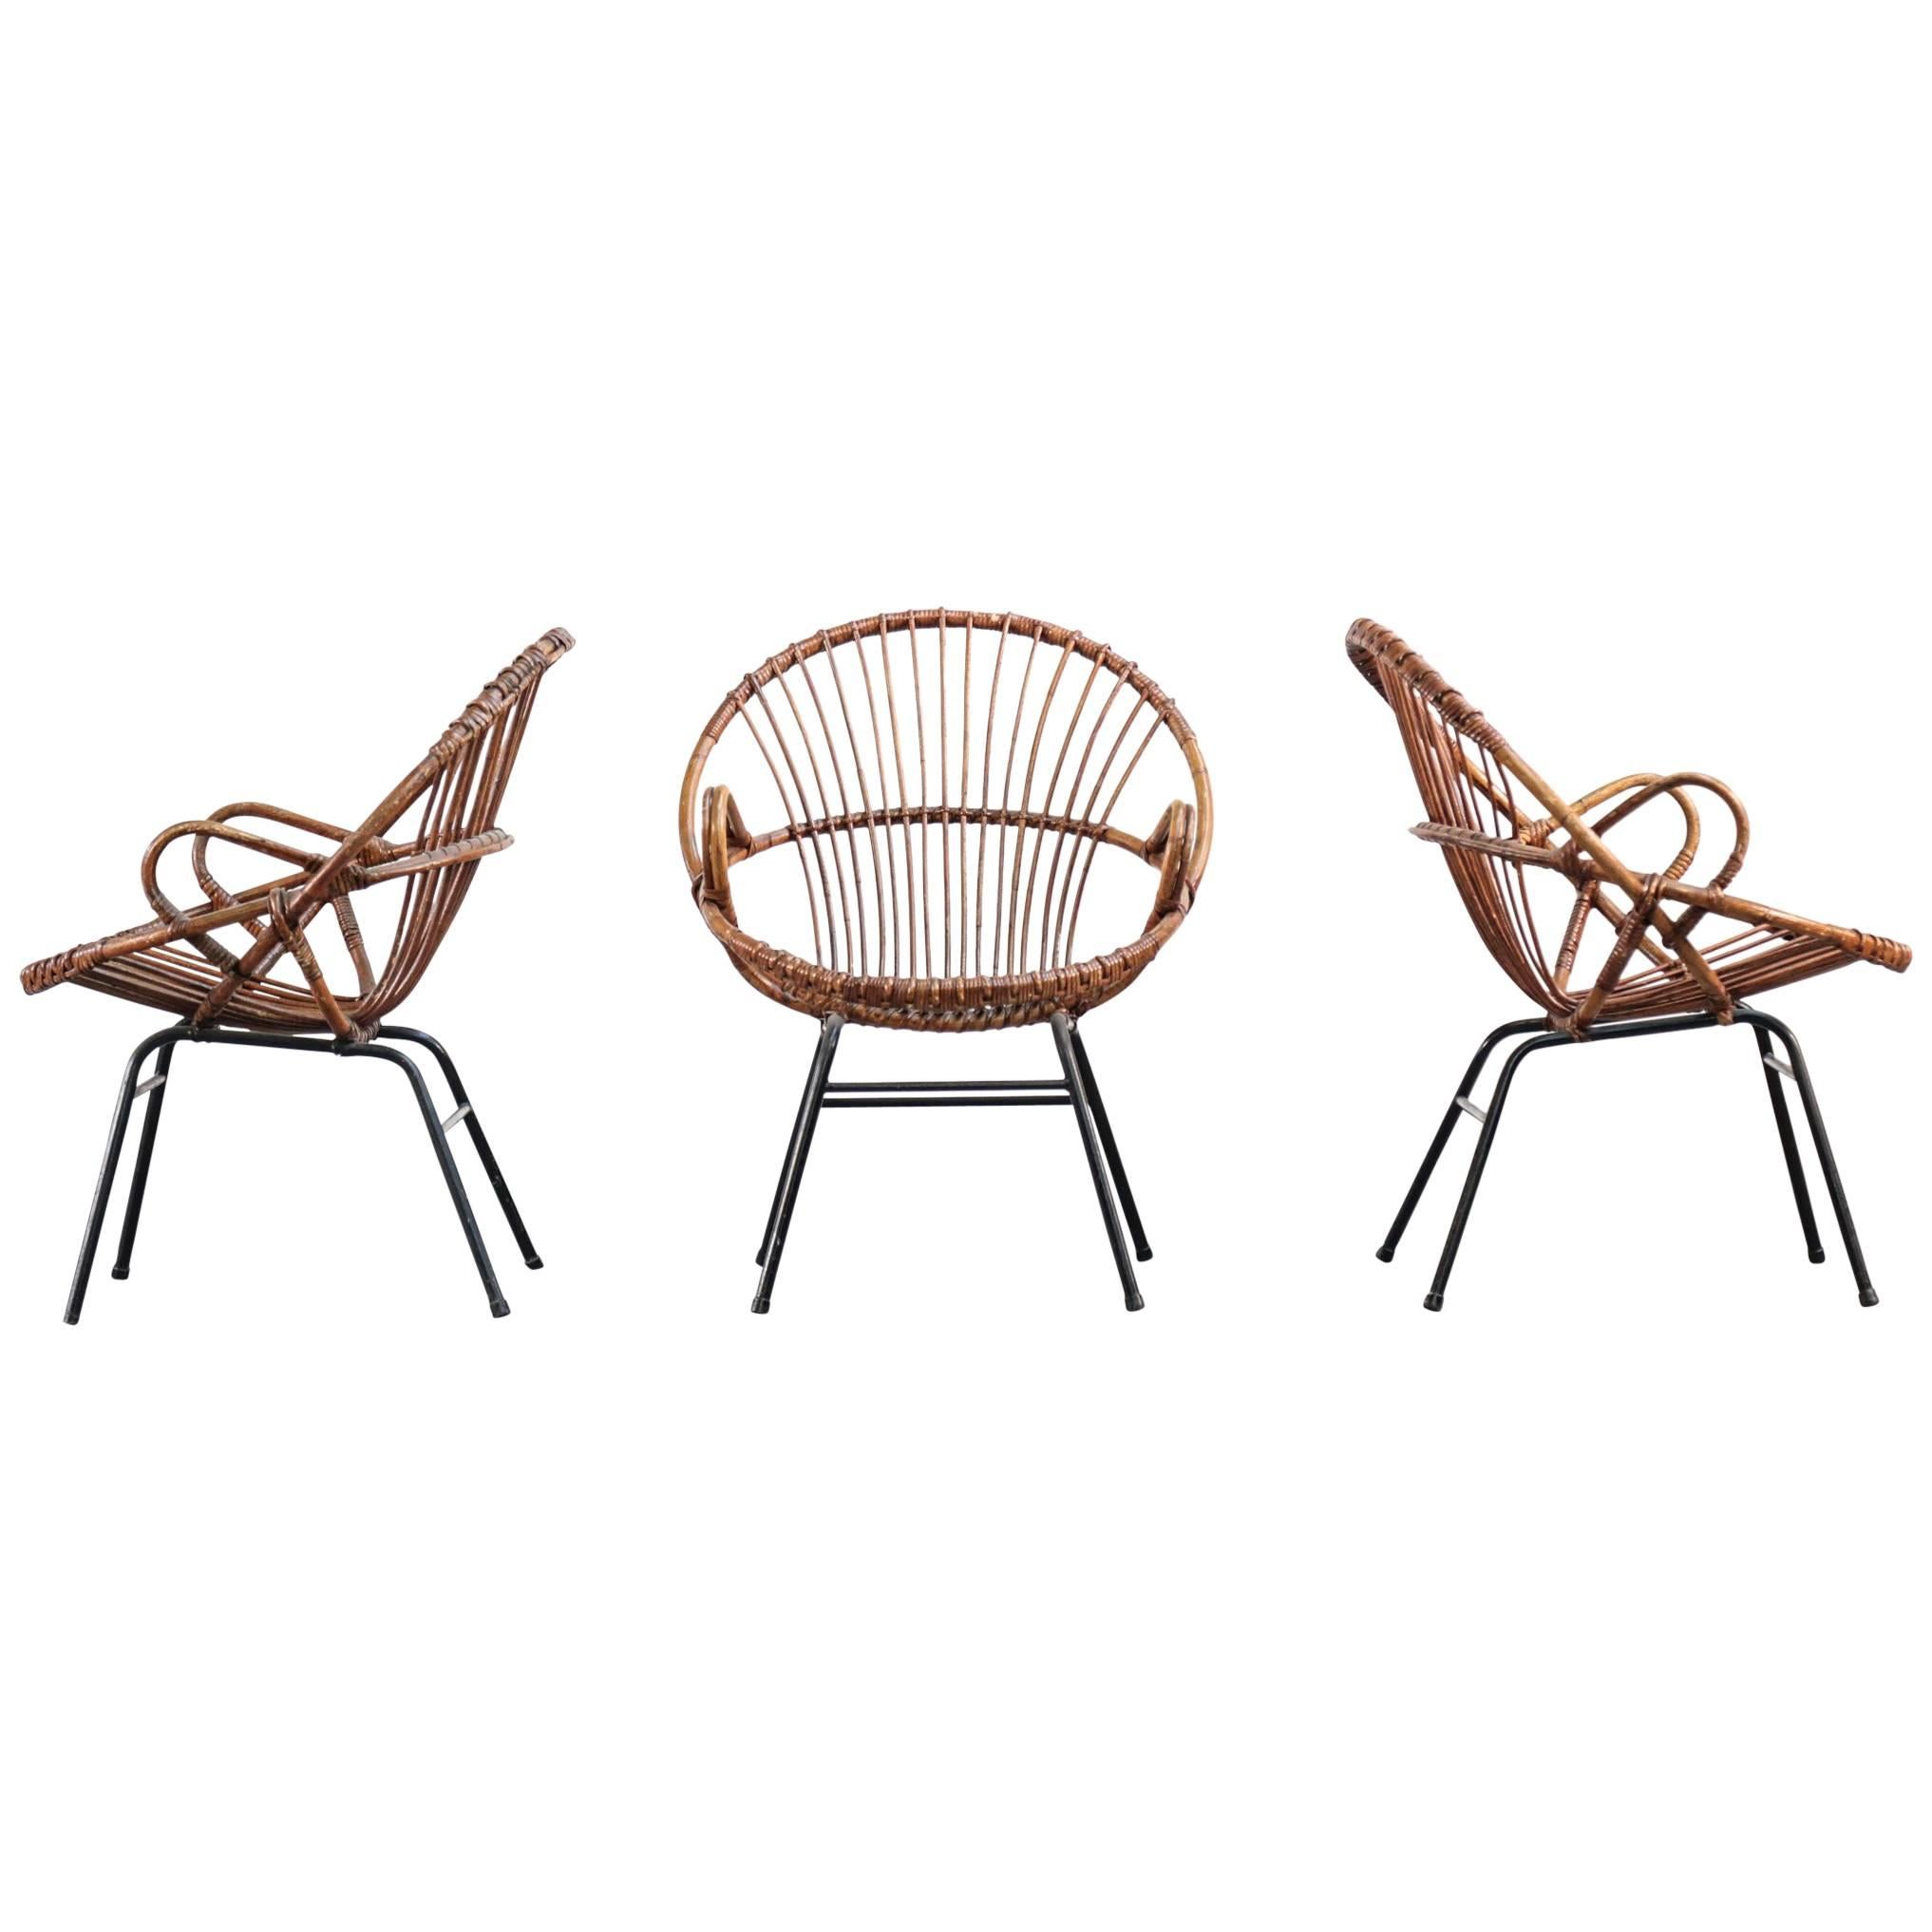 Pair of Rattan Chairs, 1960s